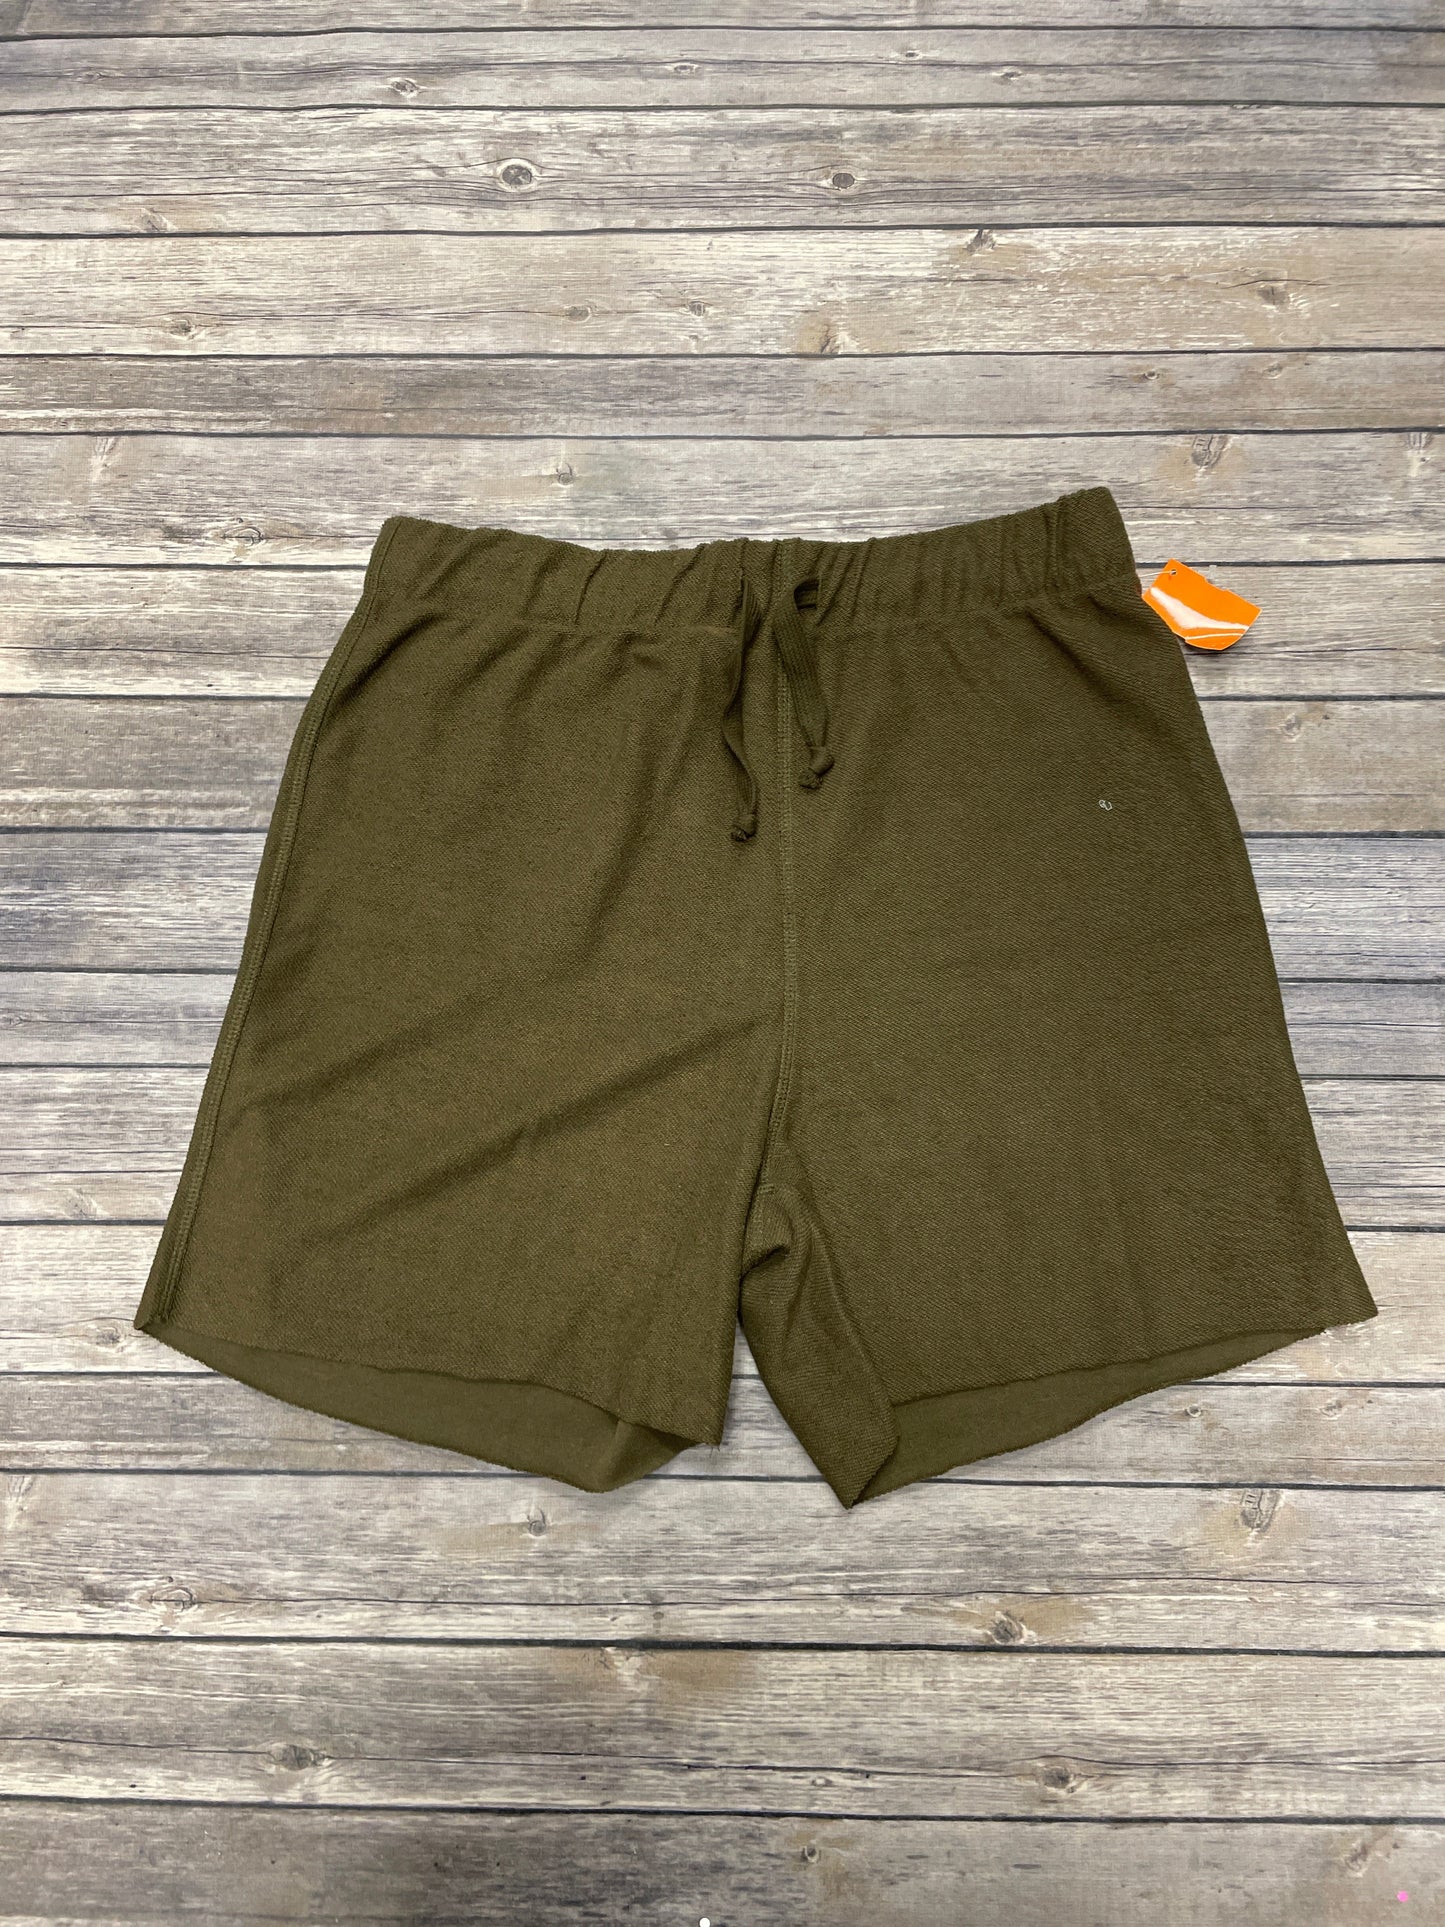 Shorts By Sage  Size: L